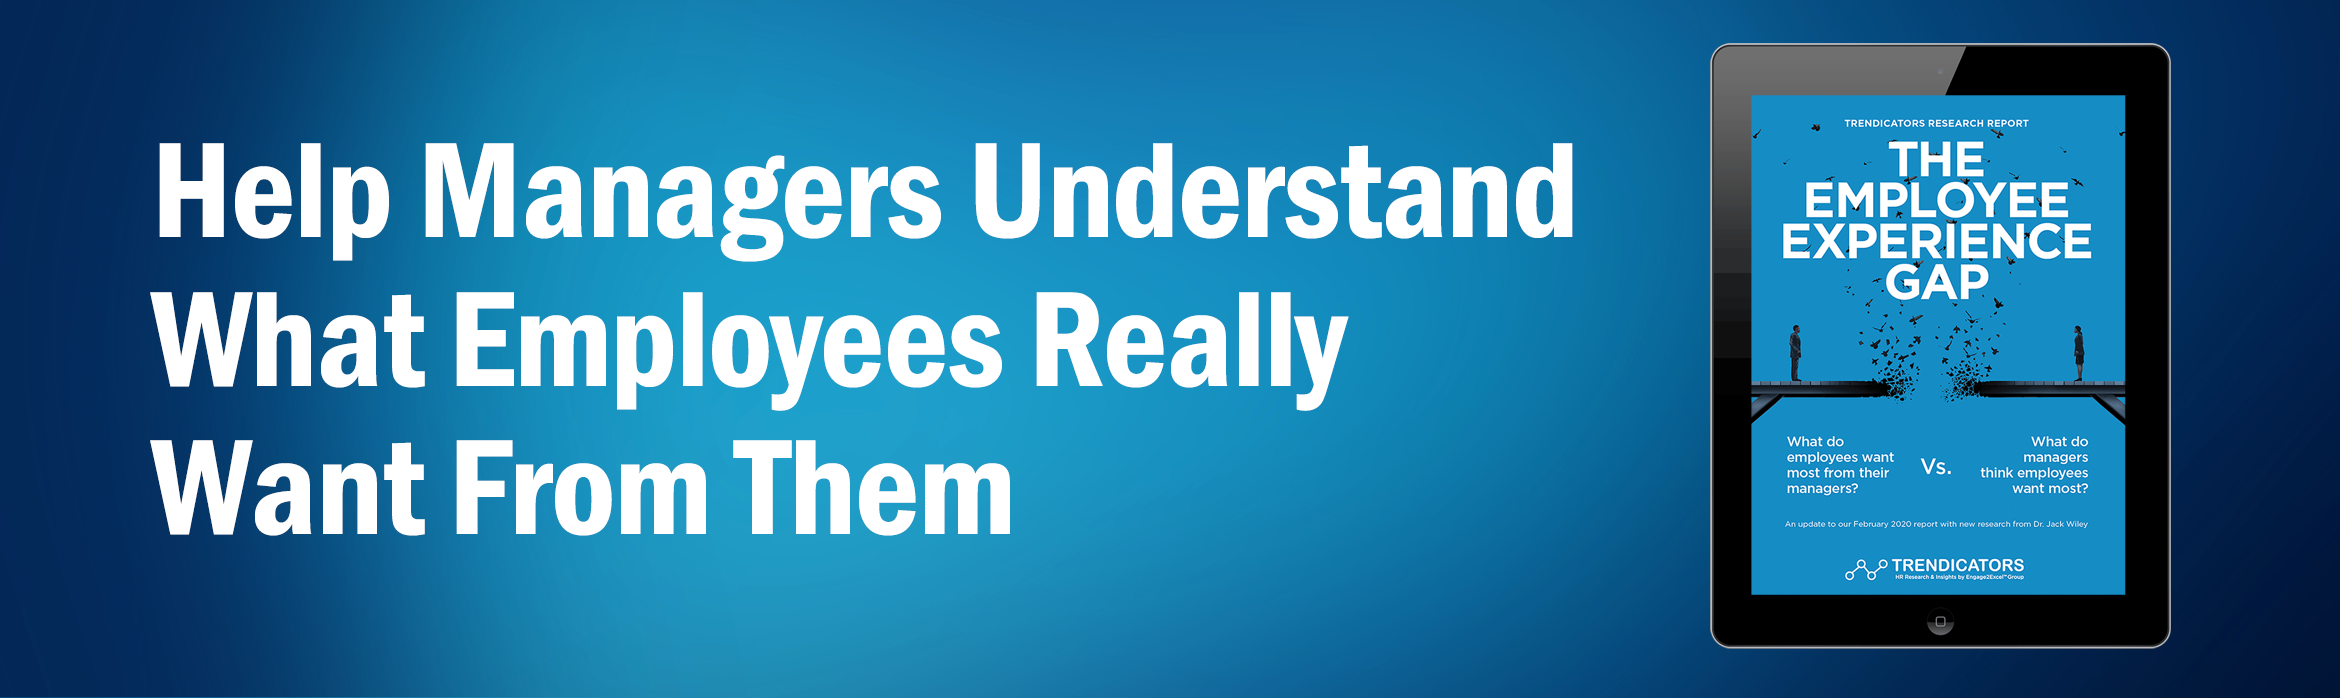 Help Managers Understand What Employees Really Want From Them